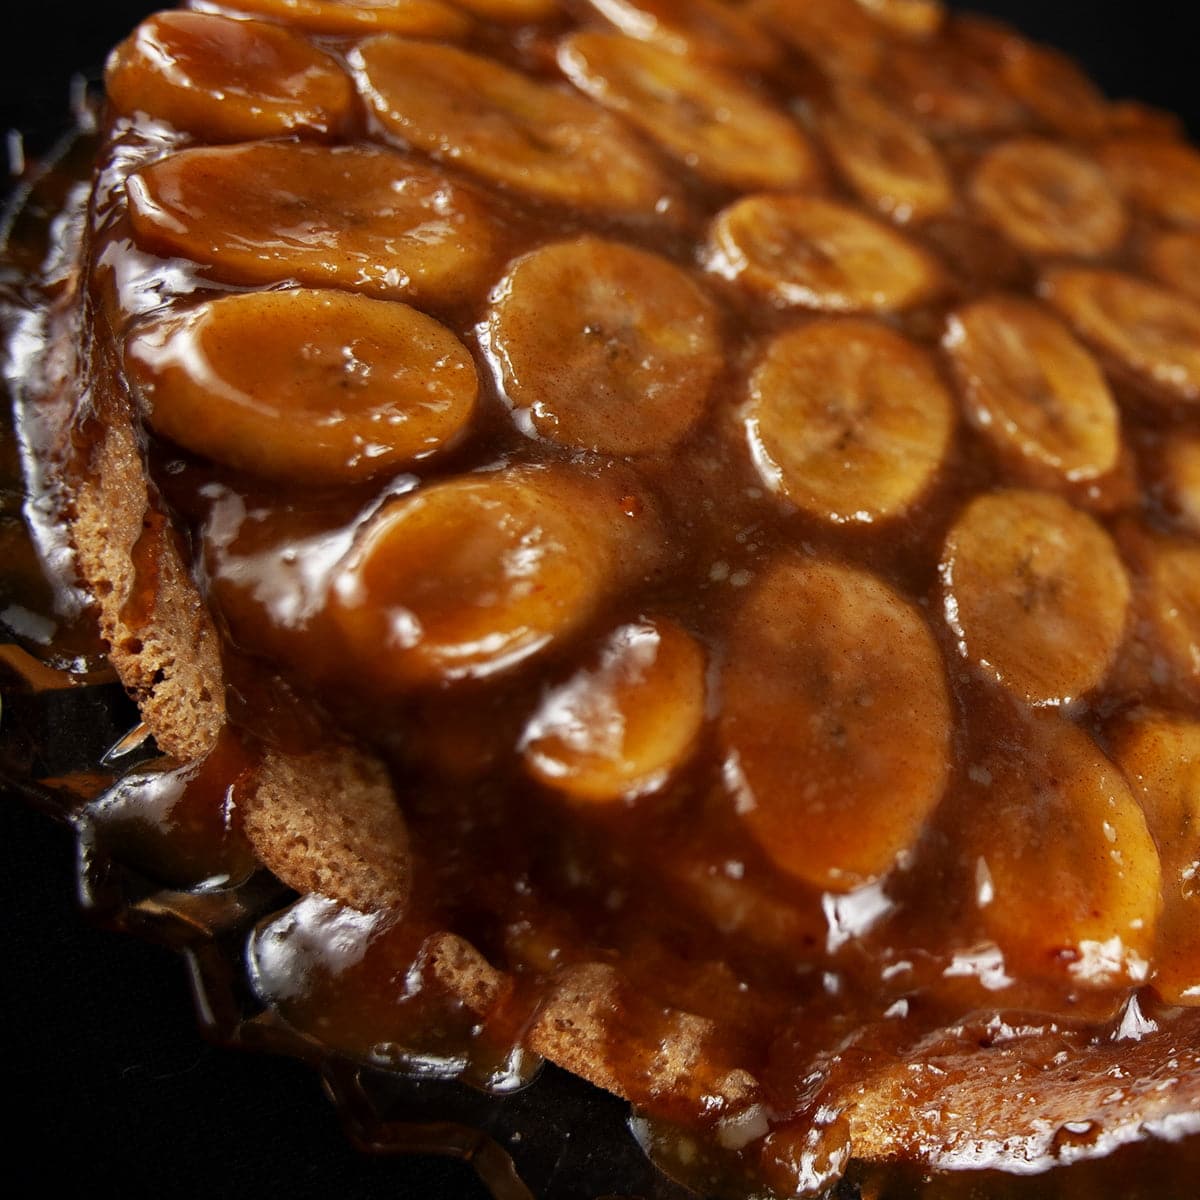 A bananas foster upside down cake: A large round cinnamon rum cake, topped with bananas and a cinnamon rum caramel... upside-down cake style.